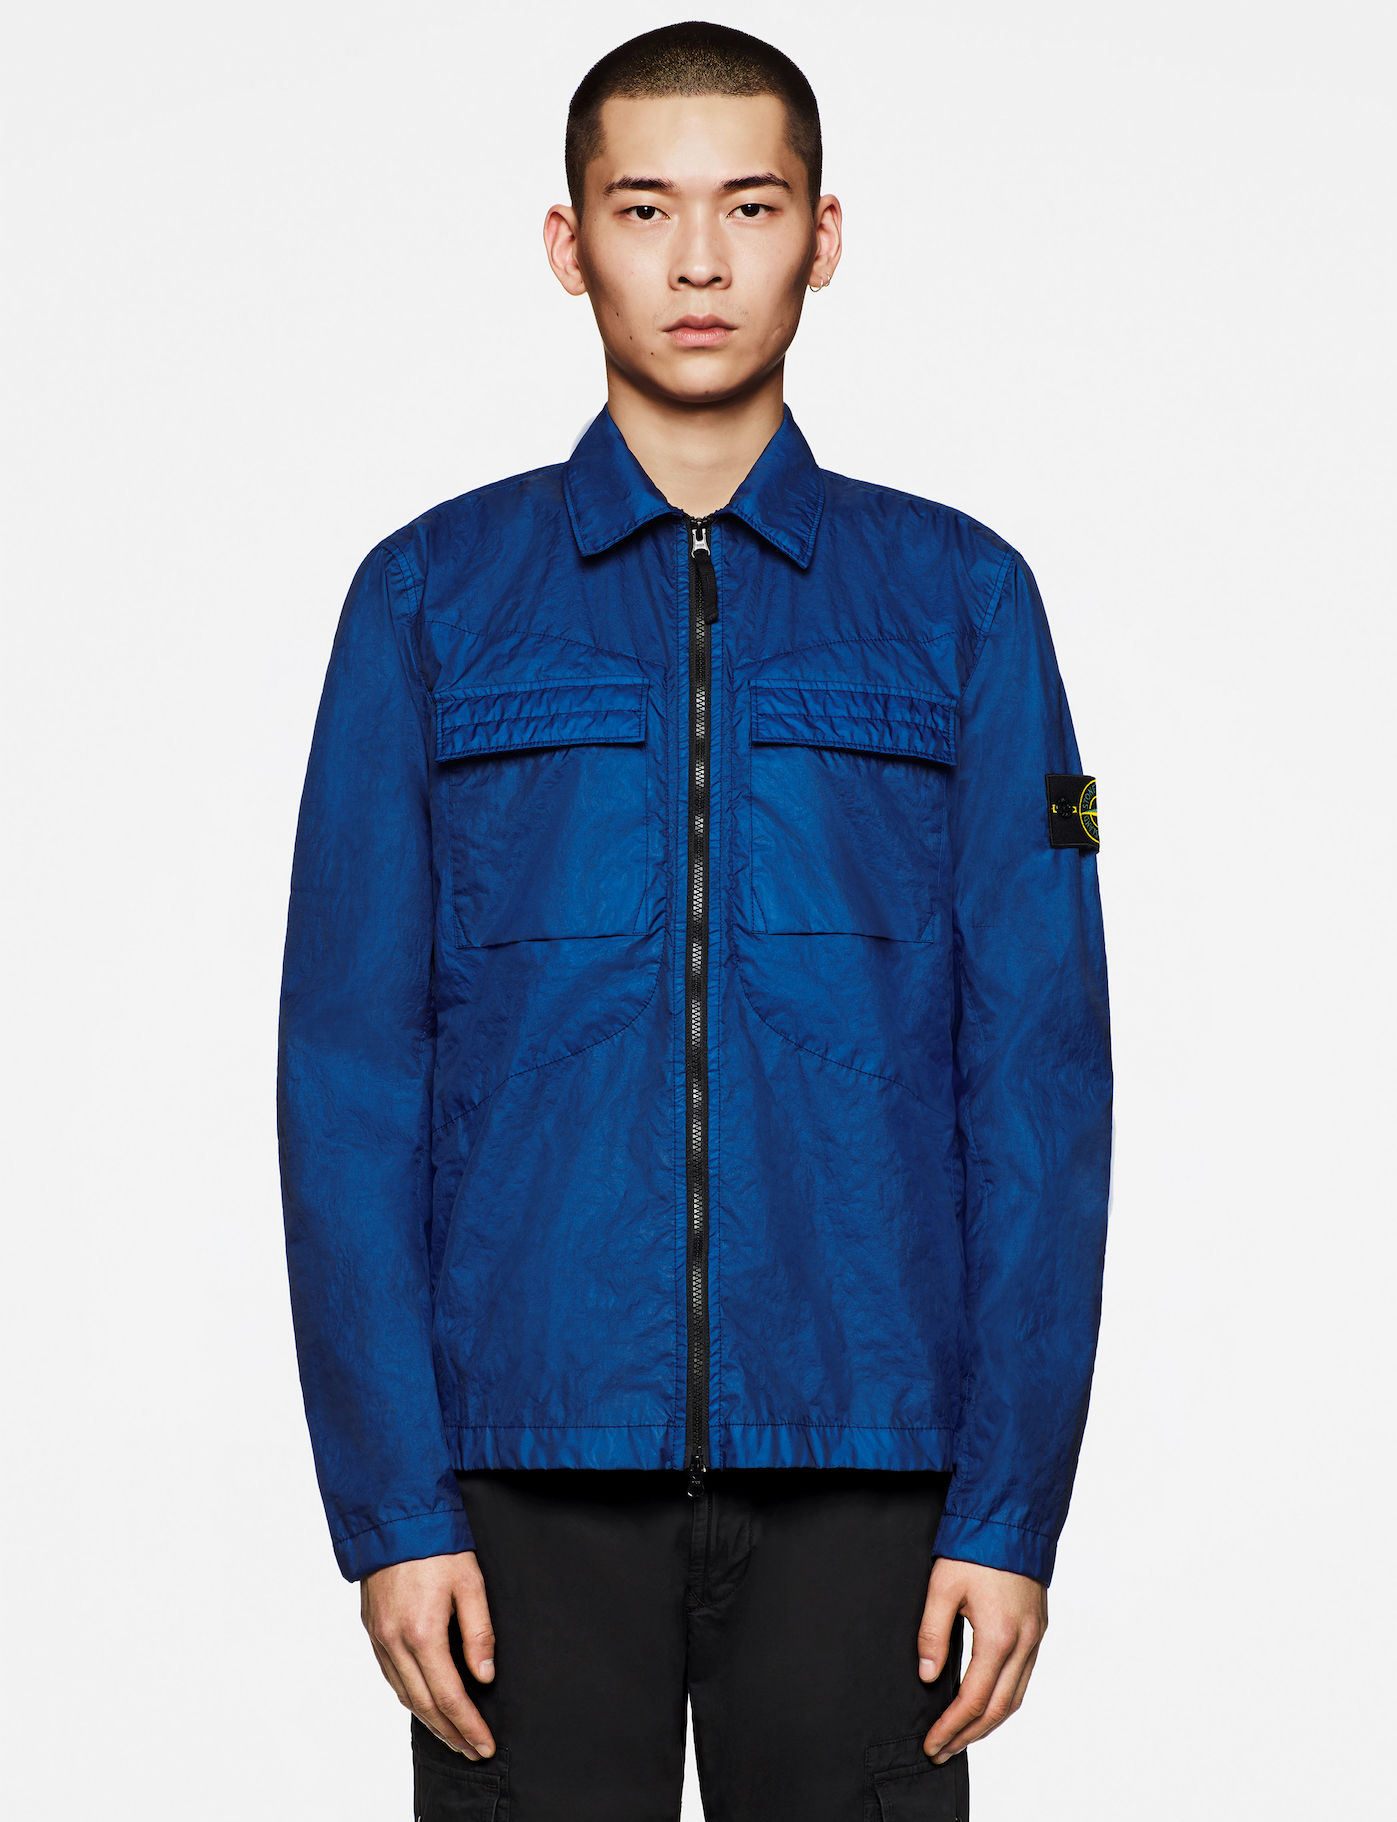 Stone Island reissues its best techwear styles for its 40th anniversary